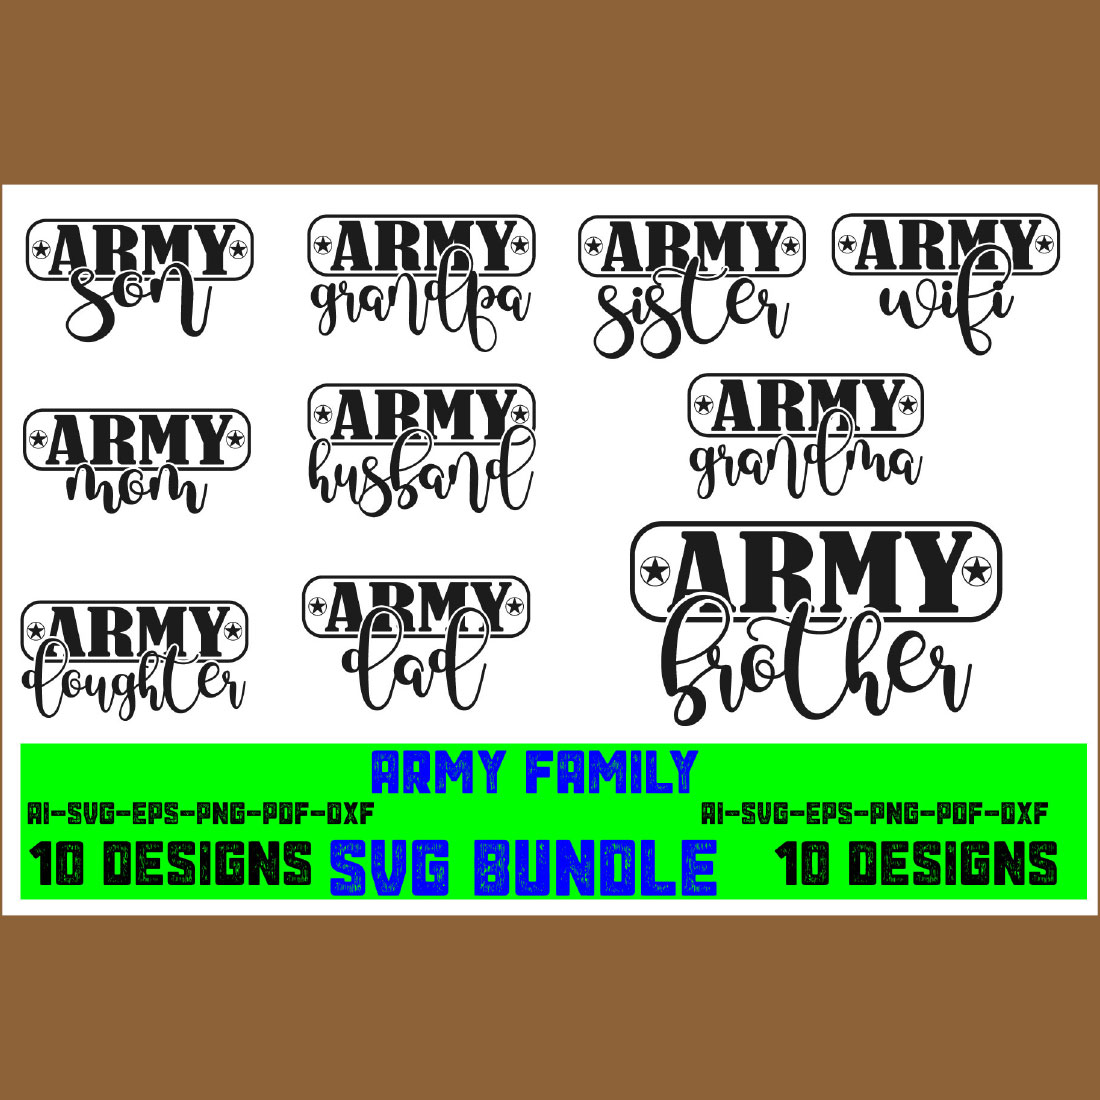 Army family SVG Bundle Veteran's Day SVG Memorial Day SVG cover image.